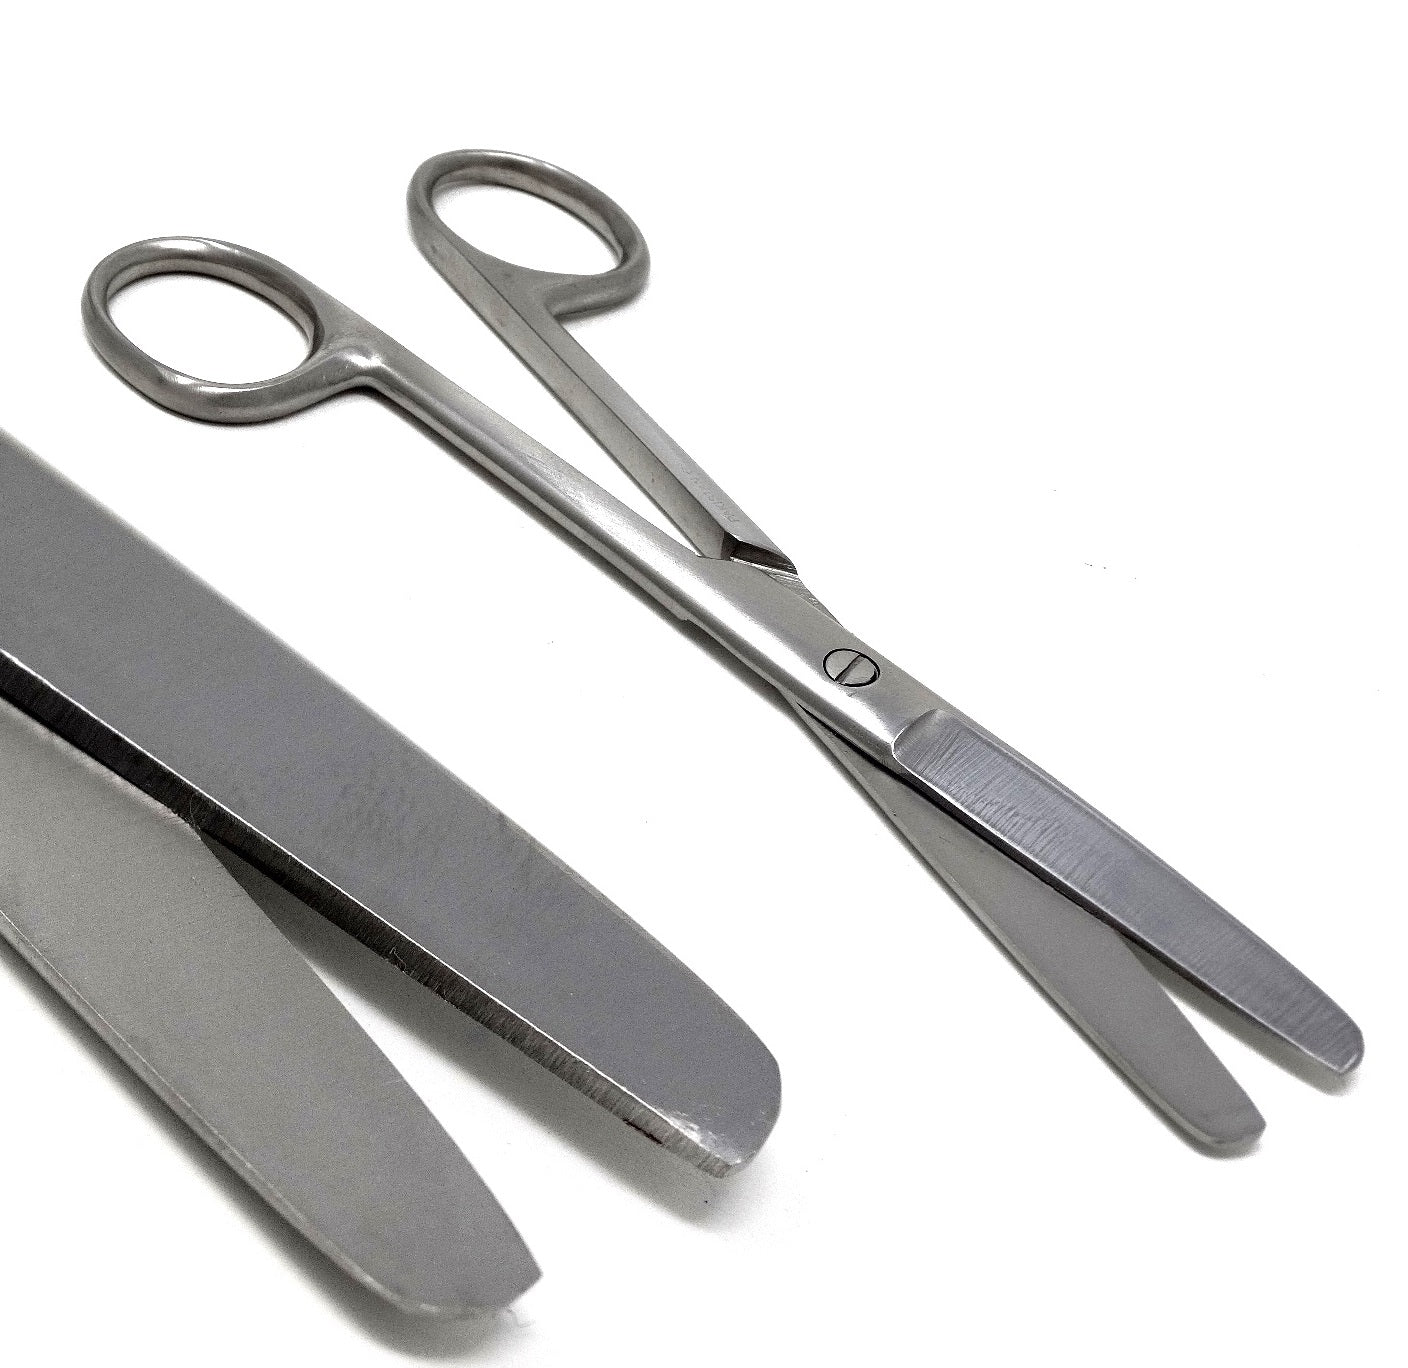 Dissecting Scissors, Blunt / Blunt Point Blades, 5.5" (14cm), Straight, Premium Quality, Stainless Steel